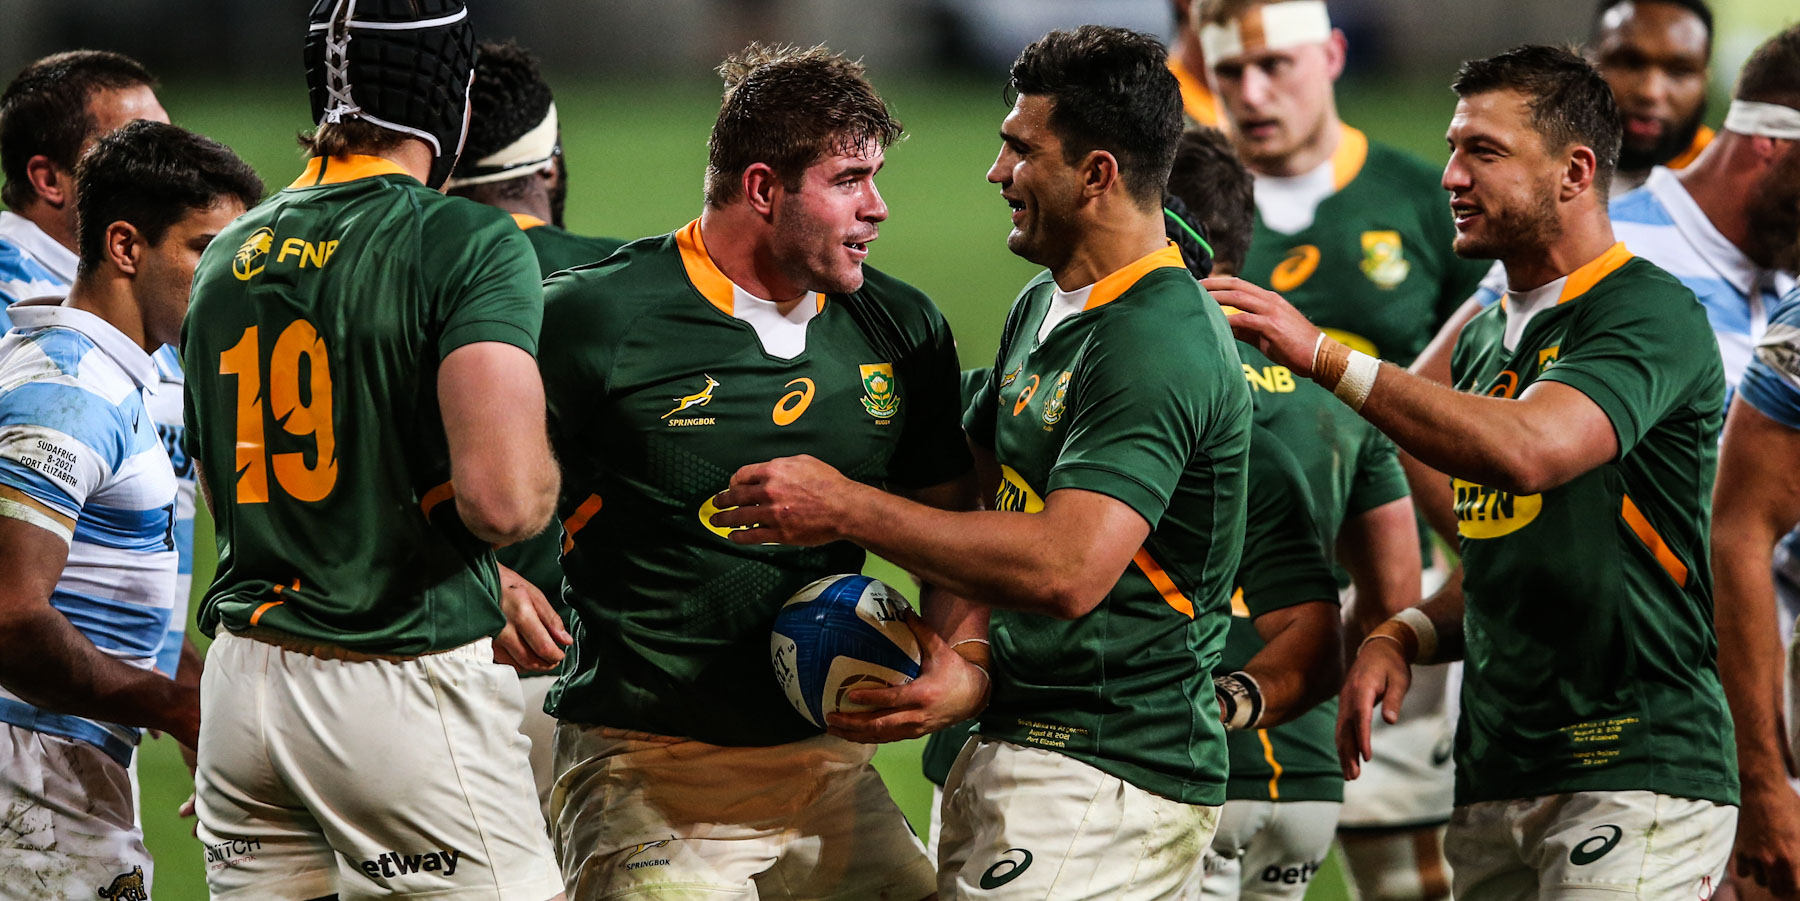 Malcolm Marx scored the Boks' second try against Argentina on Saturday.